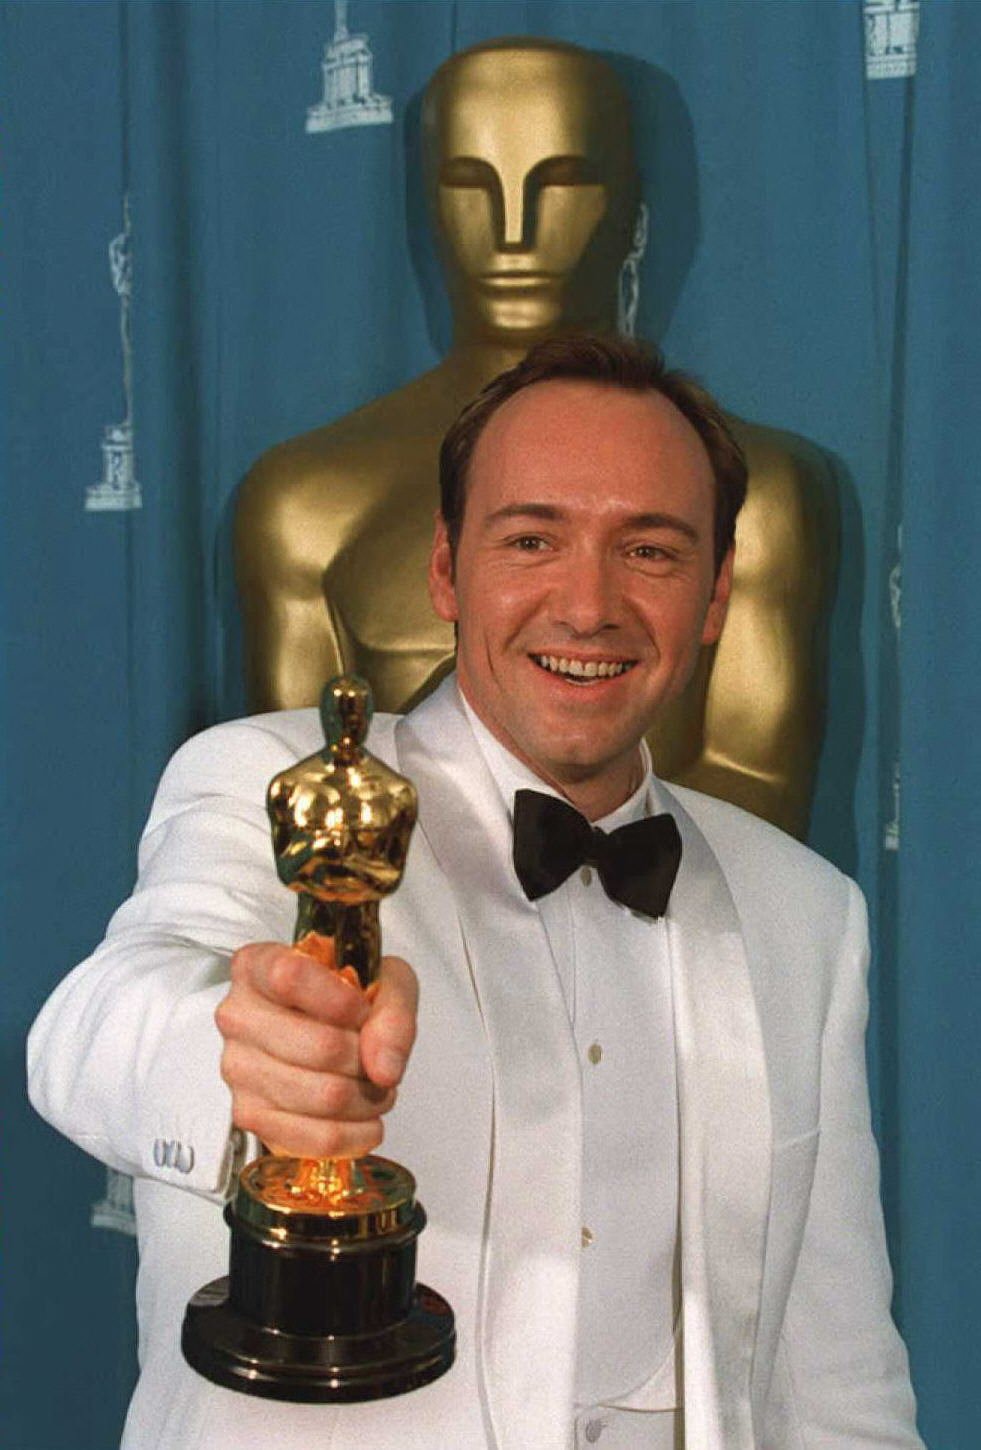 Kevin Spacey holding up his Oscar after winning the award.